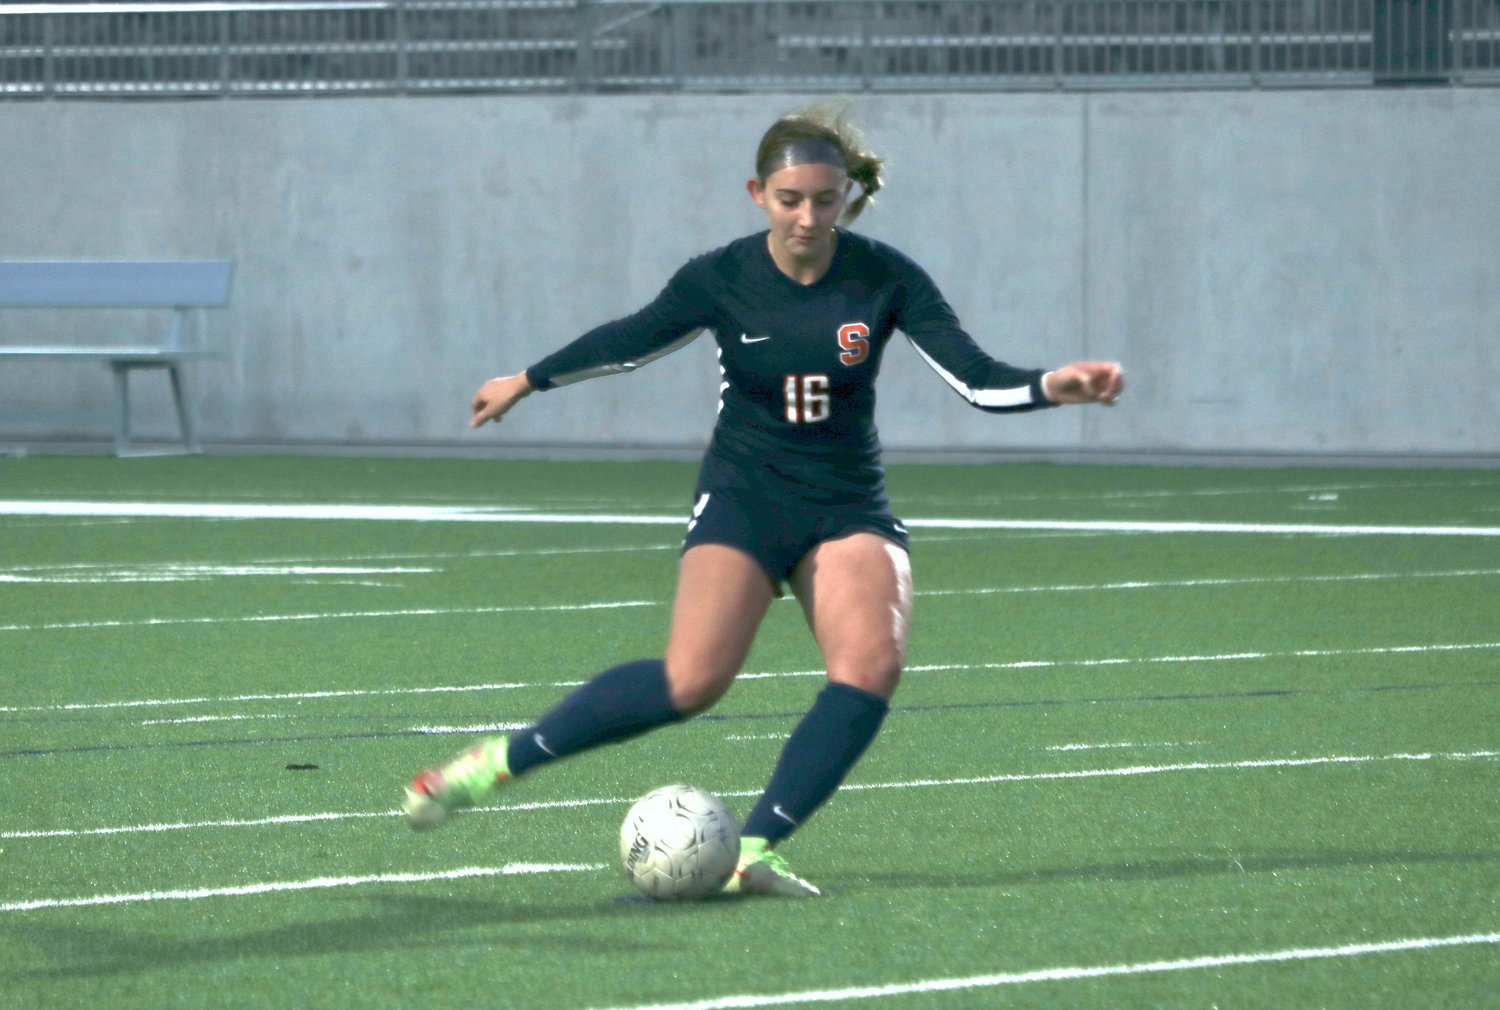 Katie Lennon shoots a pentaly kick during Saturday’s game between Seven Lakes and Lake Travis at Legacy Stadium.